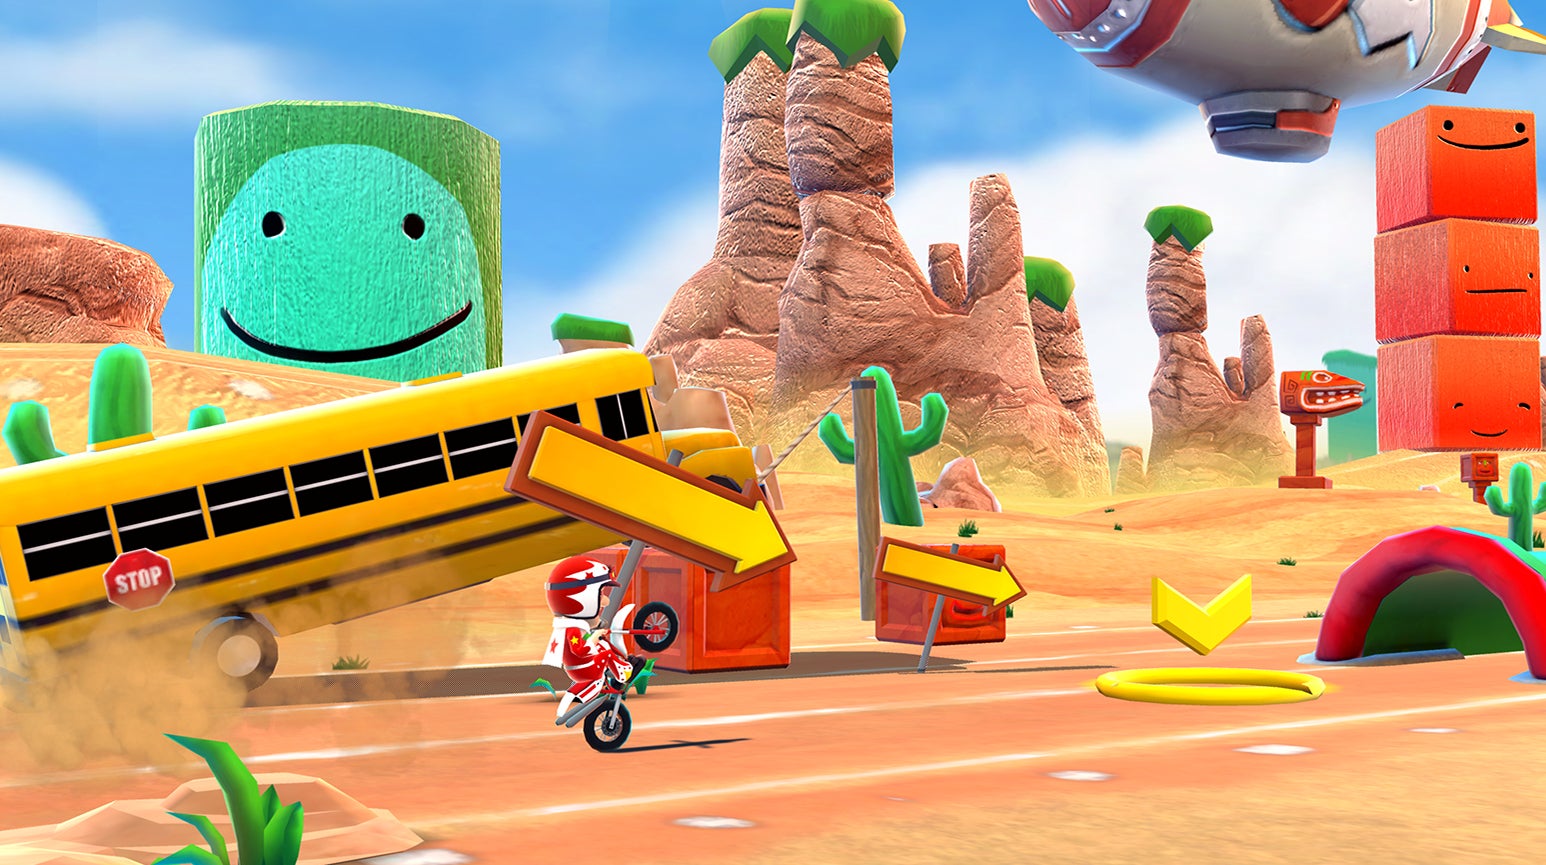 Image for No Man's Sky dev's much-loved stunt racer Joe Danger returns to iOS in remastered form